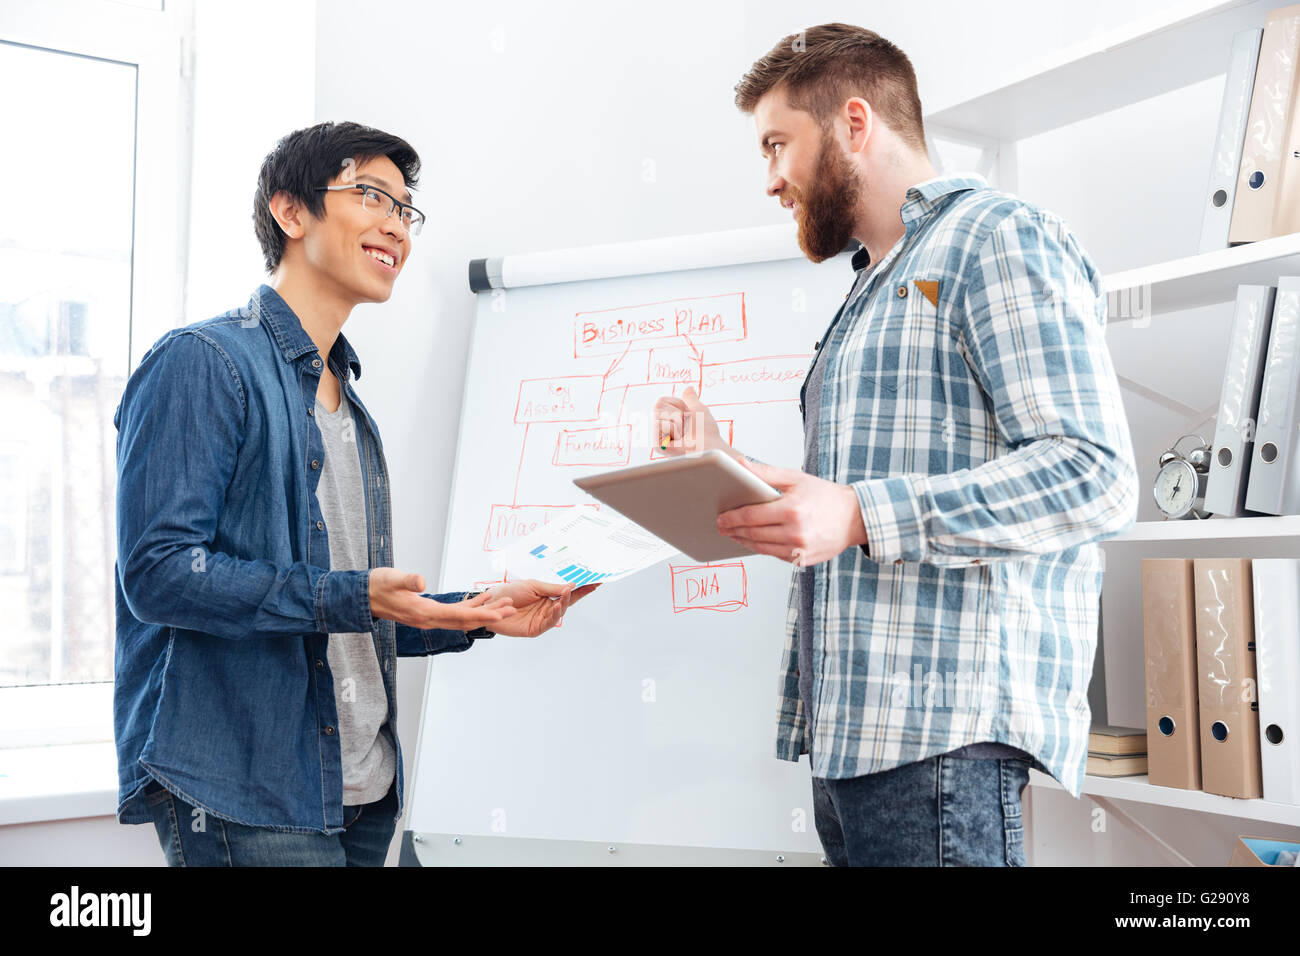 Two confident young businessmen making business plan using tablet and flipchart in office Stock Photo